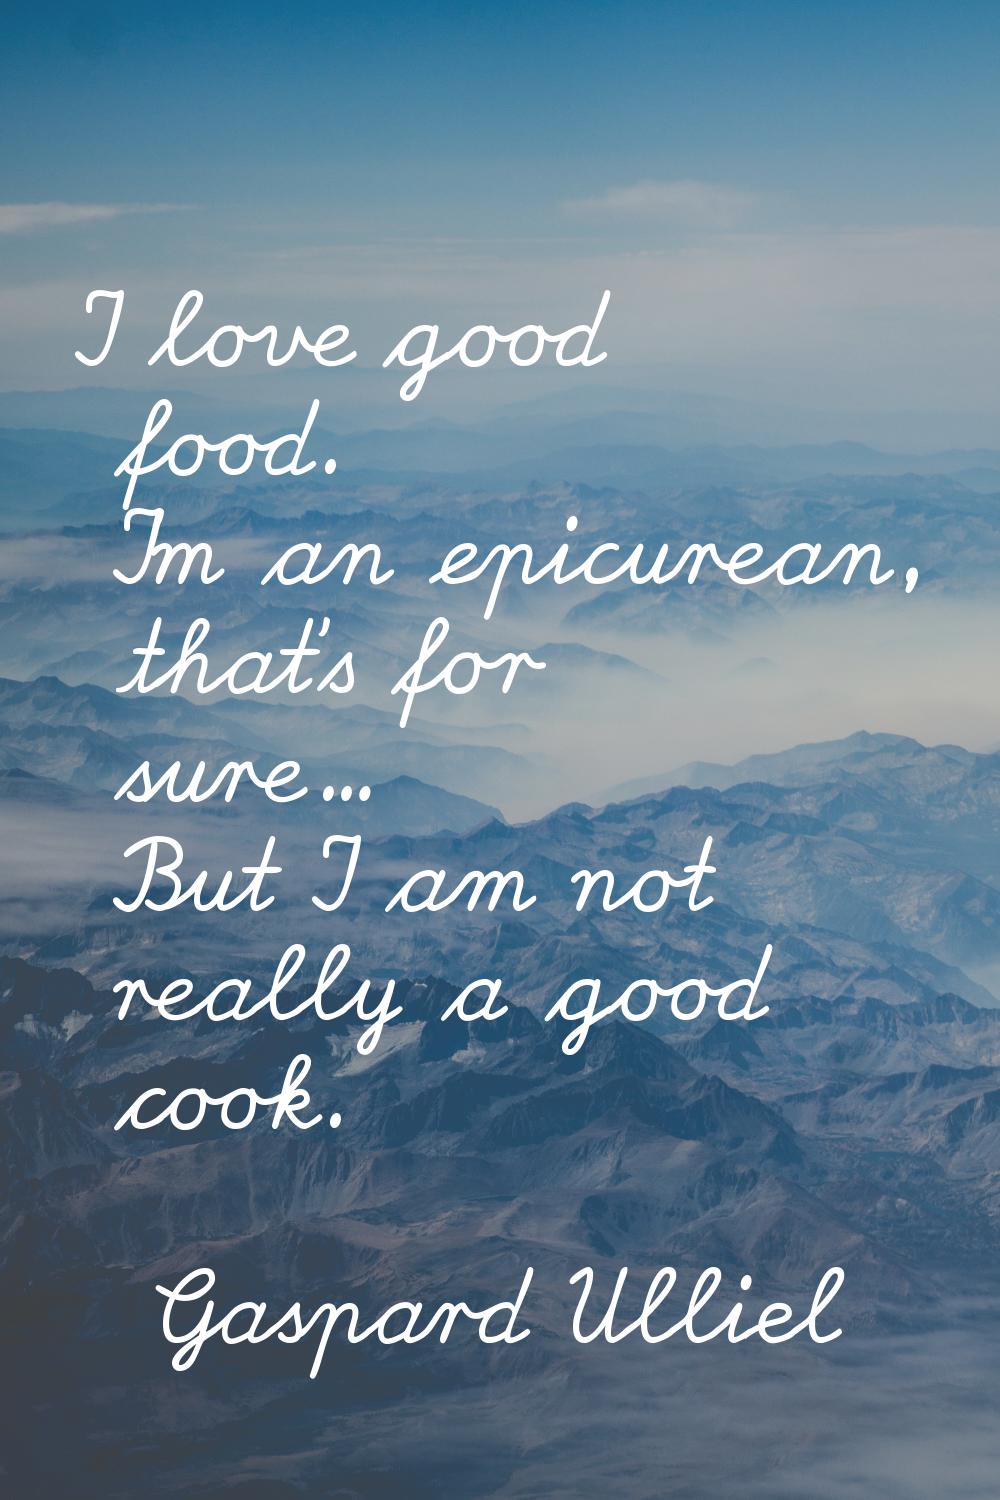 I love good food. I'm an epicurean, that's for sure... But I am not really a good cook.